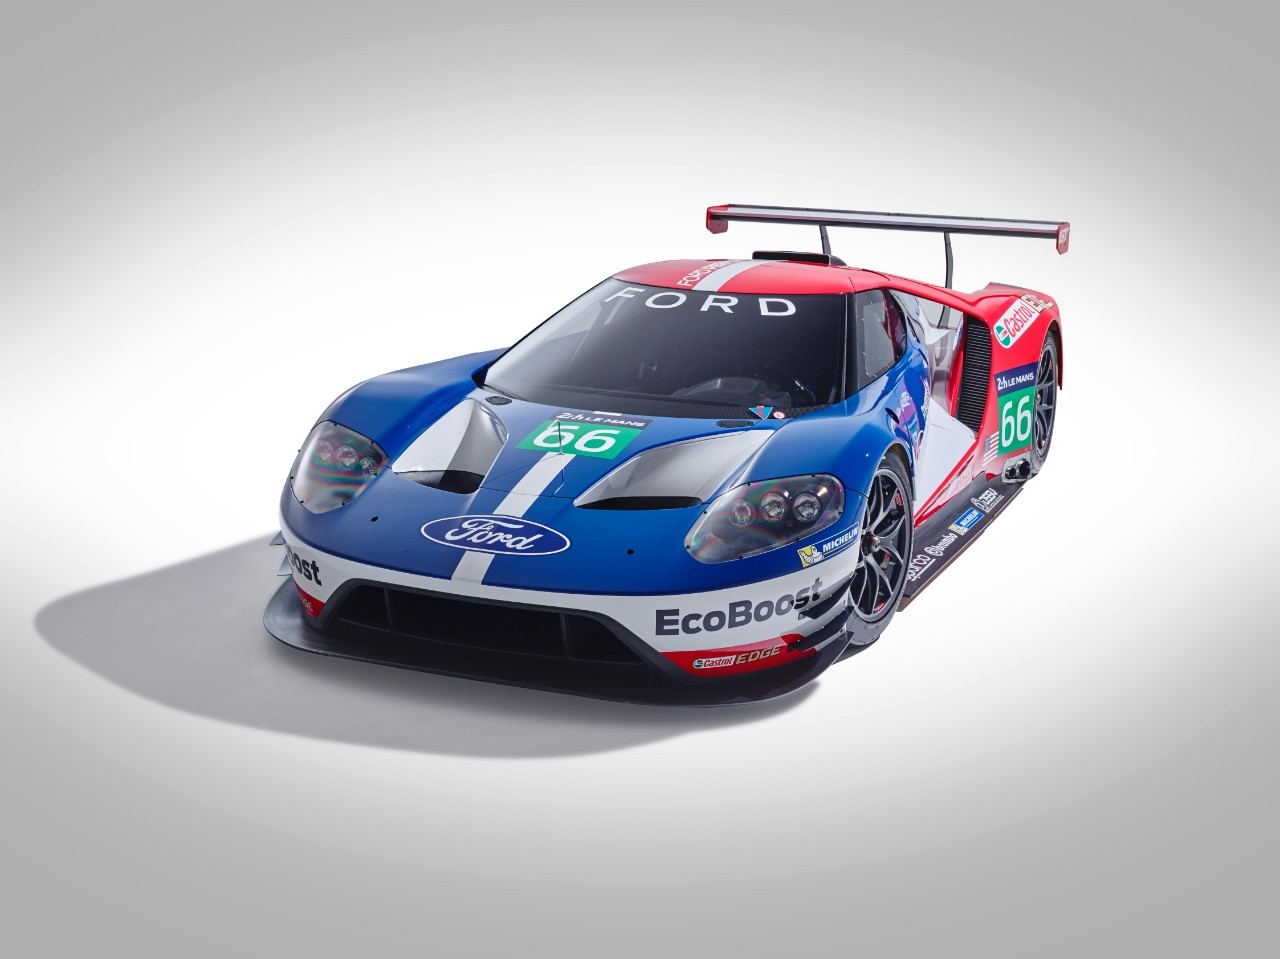 ford-gt-le-mans-racecar-confirmed-to-debut-at-the-2016-rolex-24-at-daytona-video-photo-gallery_6.jpg